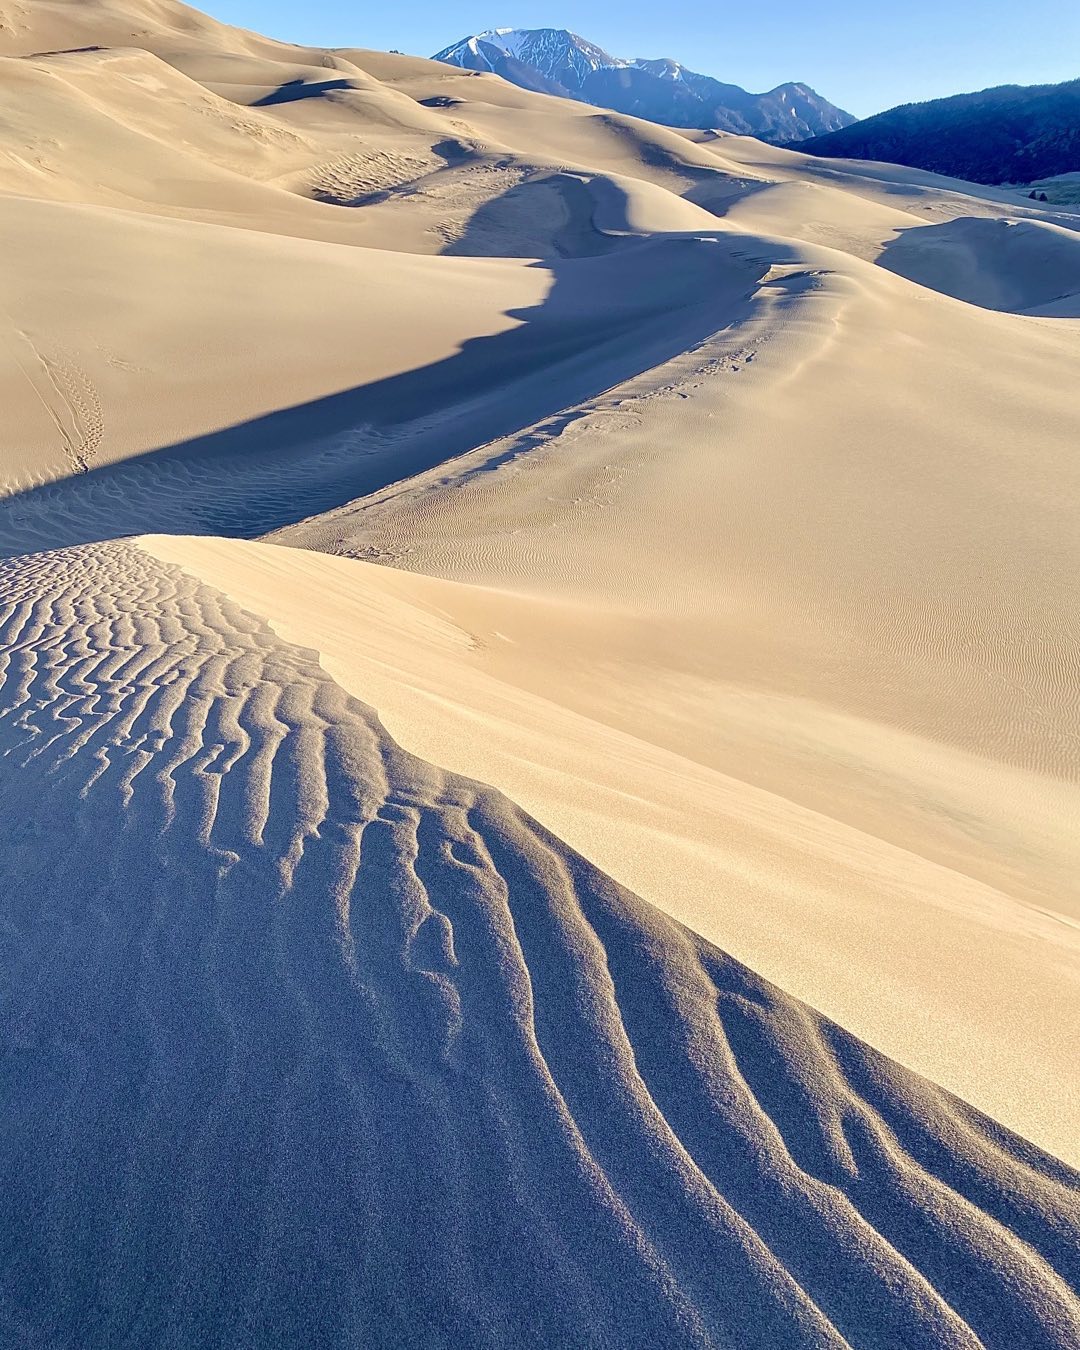 We are spending the next two days in Great Sand Dunes National Park in southeastern Colorado. Huge Dunes are magnificent! This is One of Cindy Orcutt’s early morning images. #greatsanddunesnationalpark #orcuttphotography.com #vanlife #photographywhiletravelingbyvan #sanddunes #southeasterncolorado